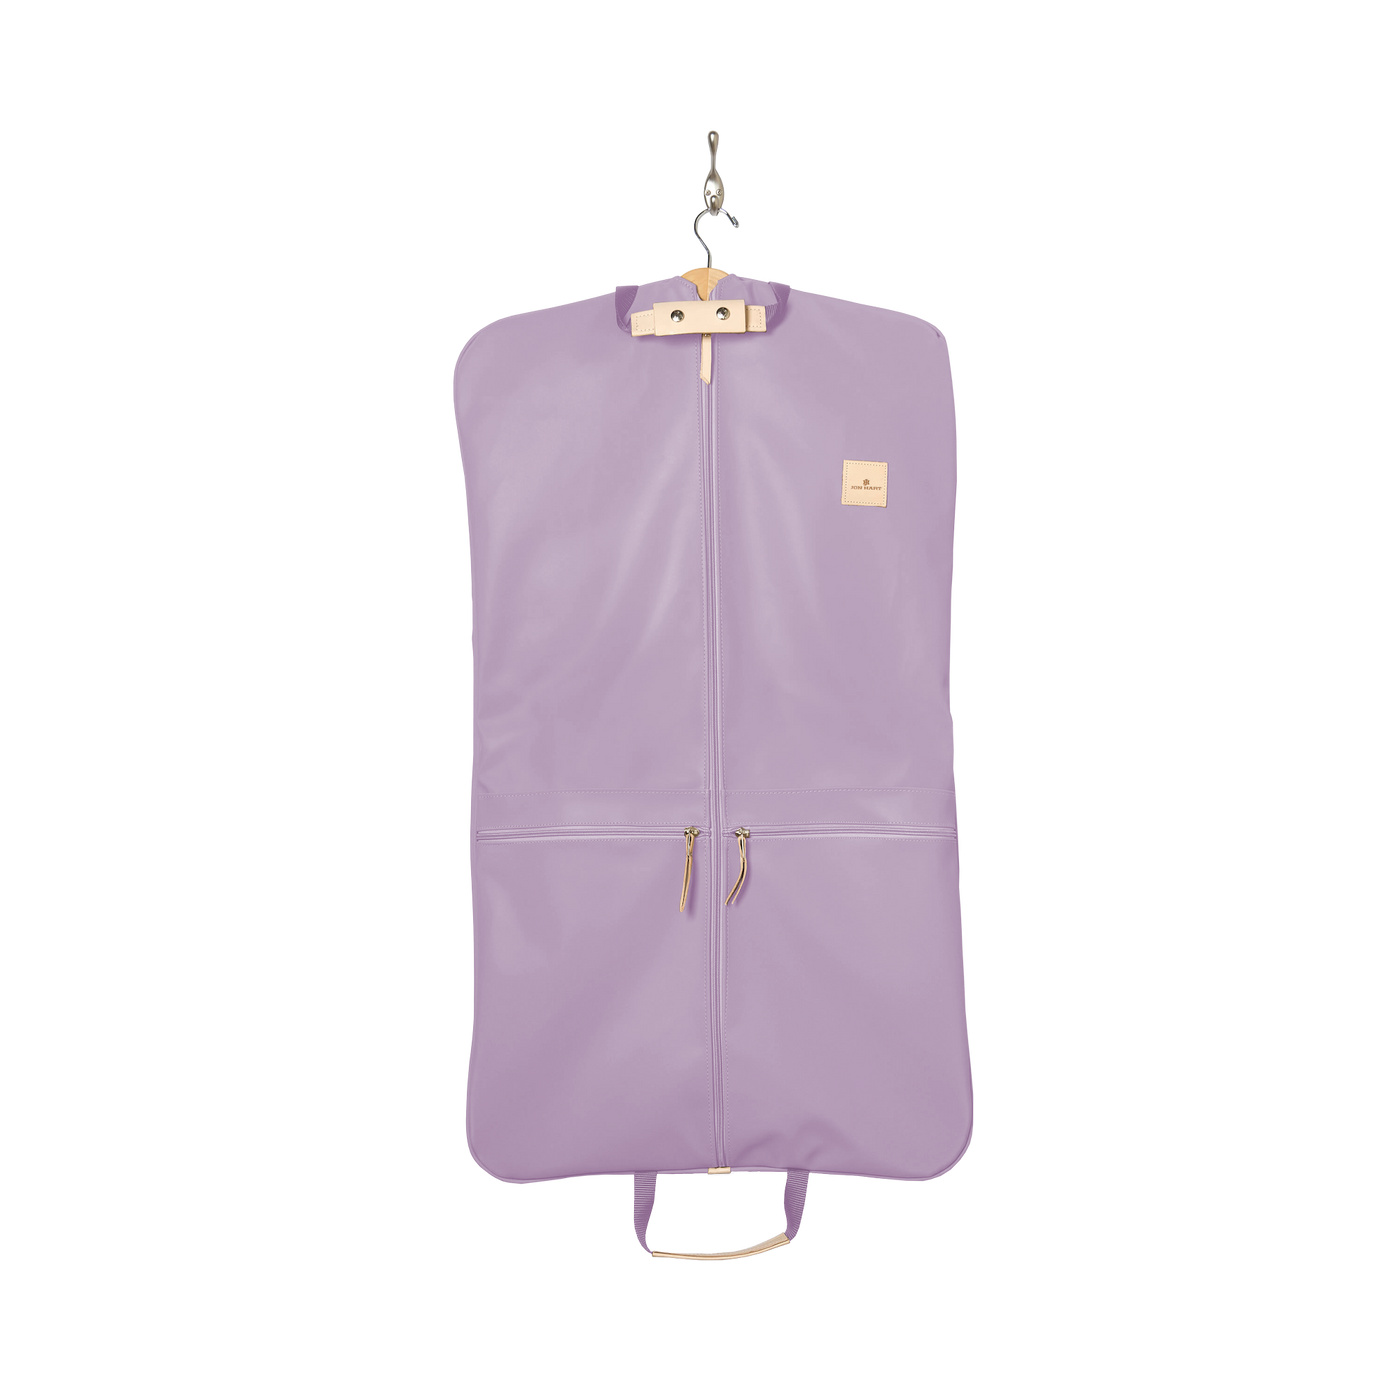 JH  Two-Suiter Hang Up Bag